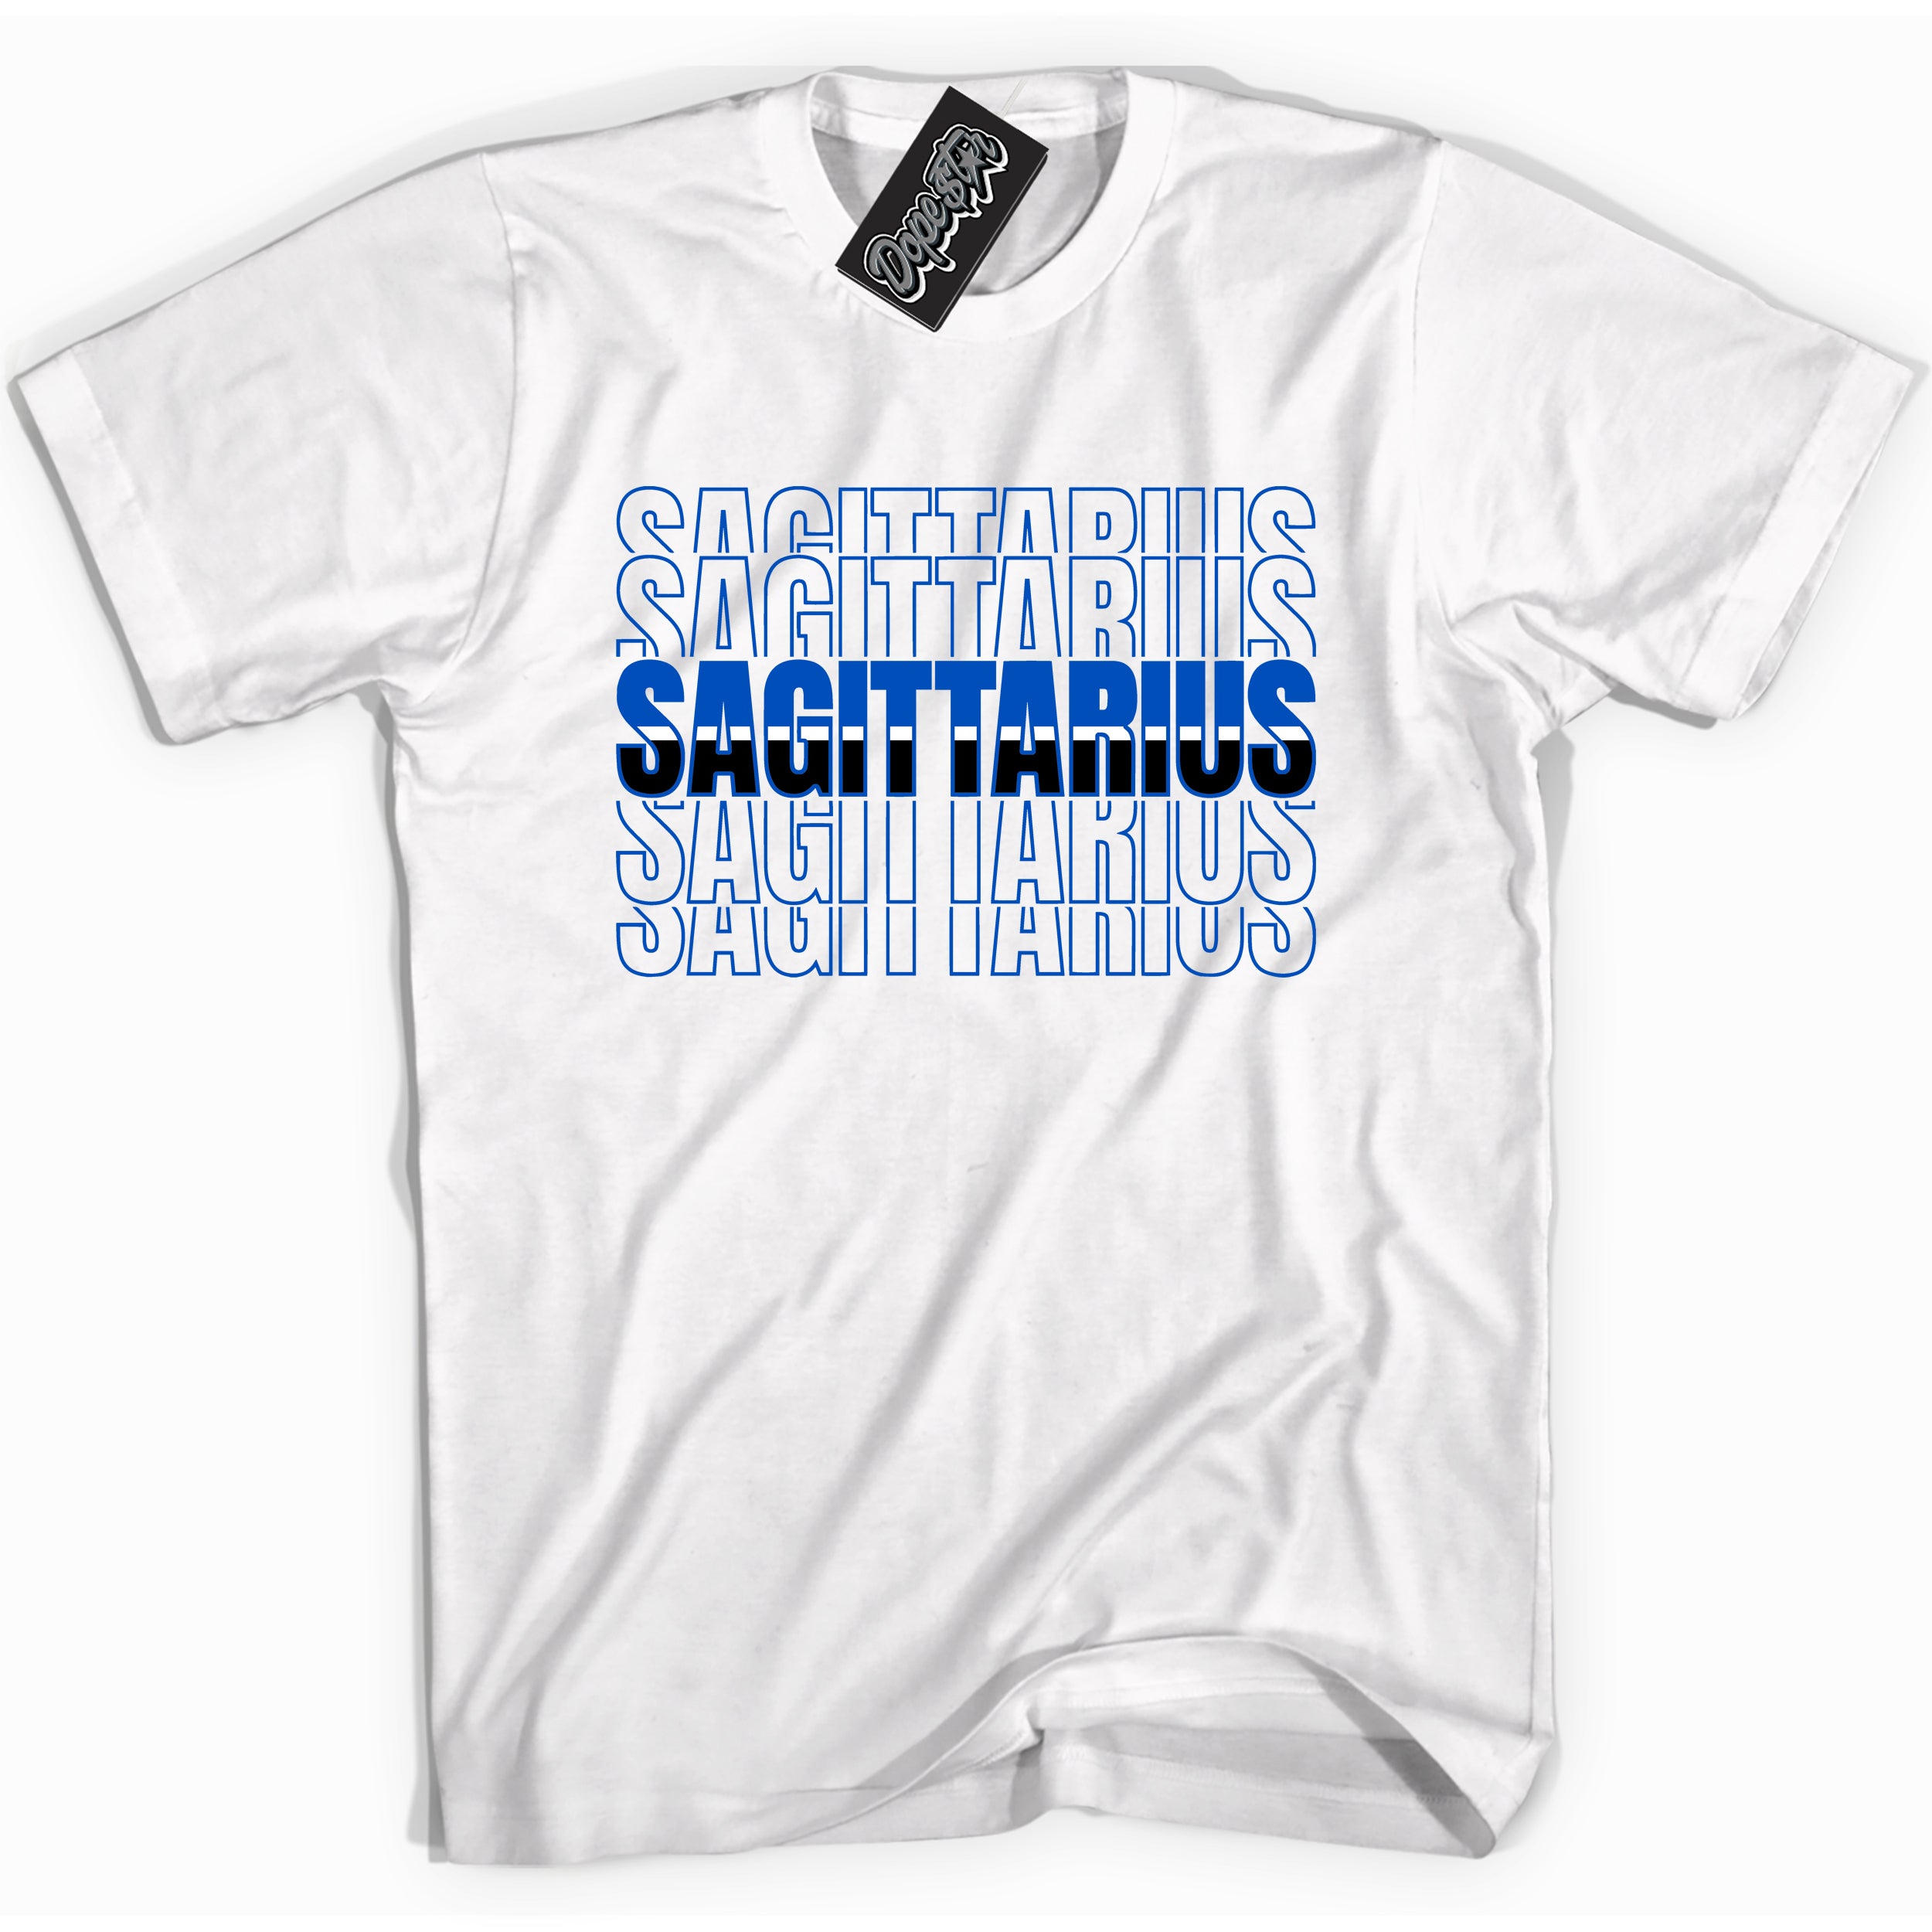 Cool White graphic tee with "Sagittarius" design, that perfectly matches Royal Reimagined 1s sneakers 